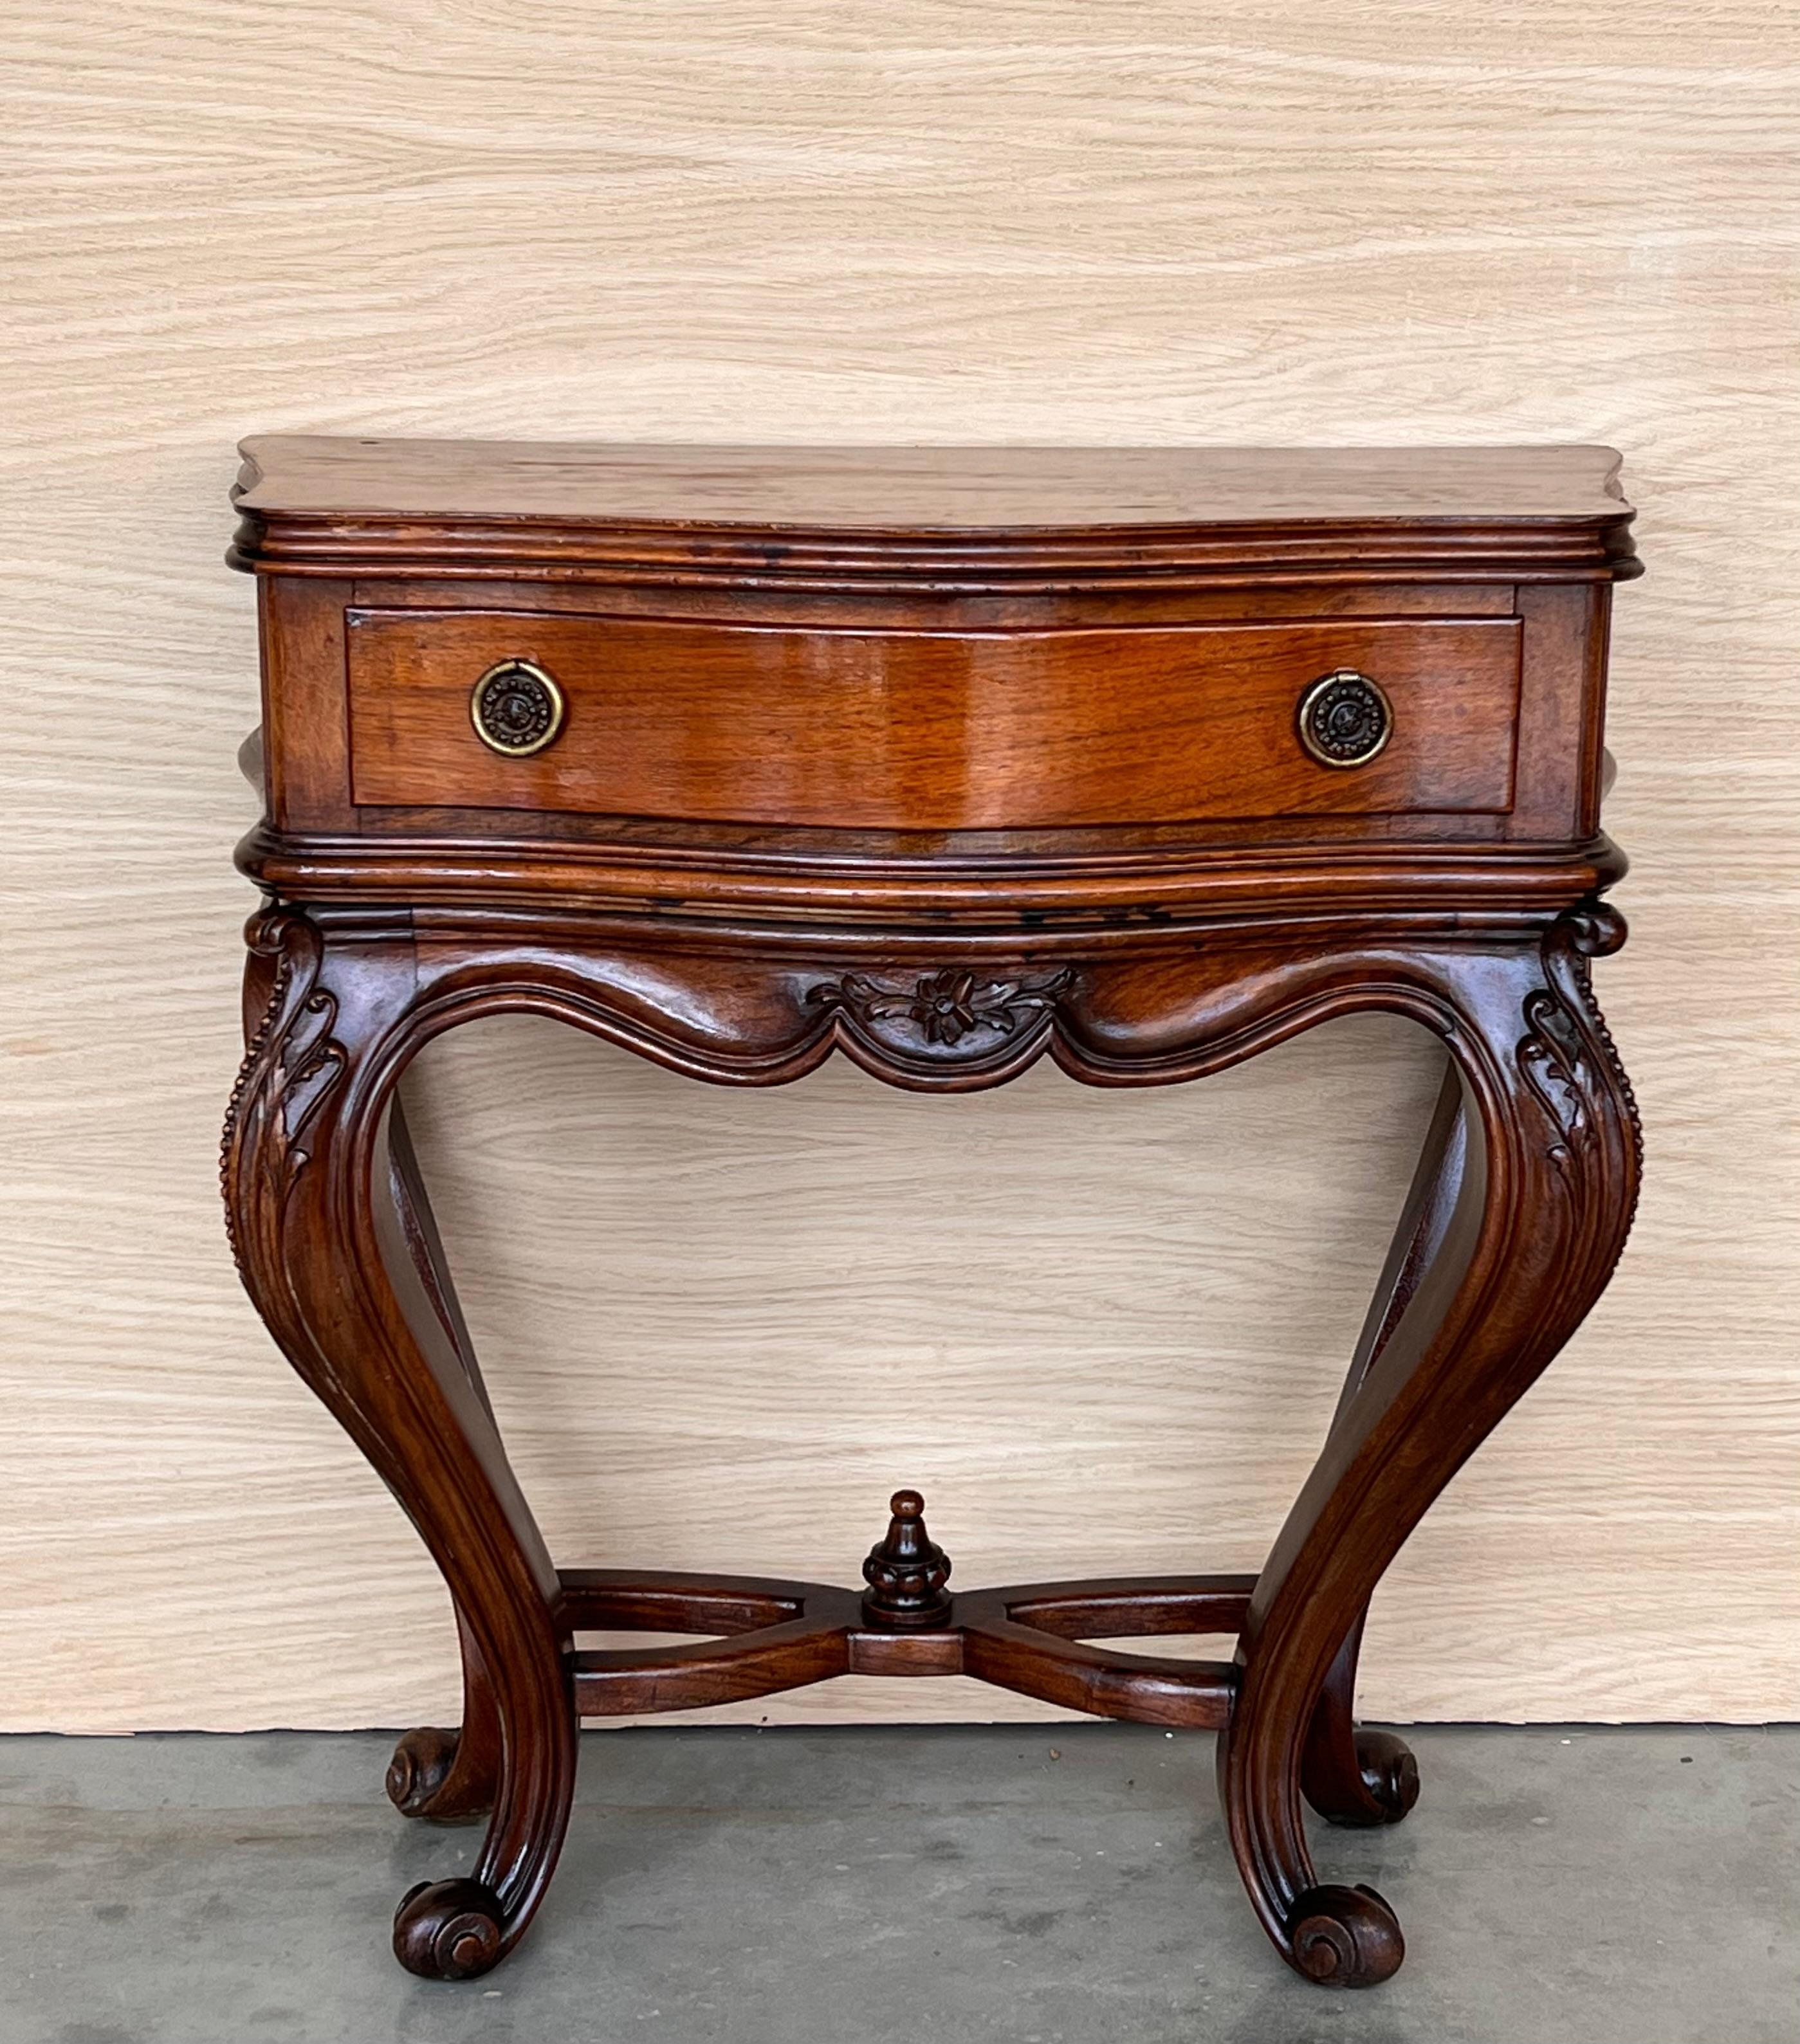 A French walnut drawer nightstands from the late-19th century with ribbon-carved moldings and carved skirt. This petite French table features a rectangular top with beveled edges, sitting above a drawer simply adorned with a delicate twisted ribbon